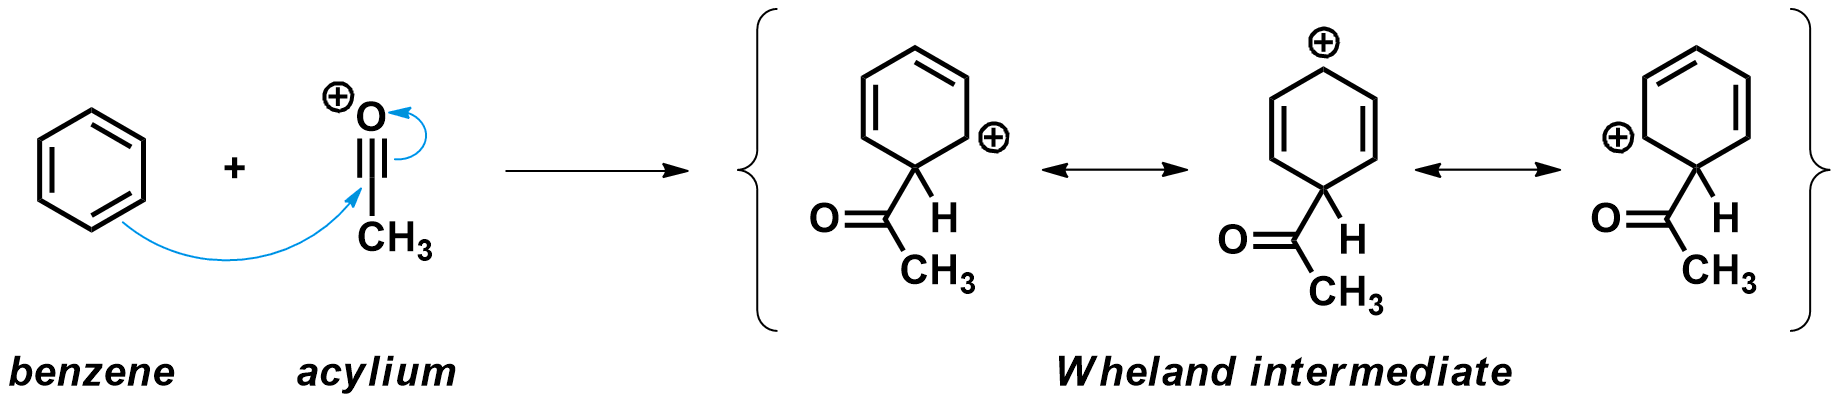 Benzene attacks an acylium cation, forming a Wheland intermediate.